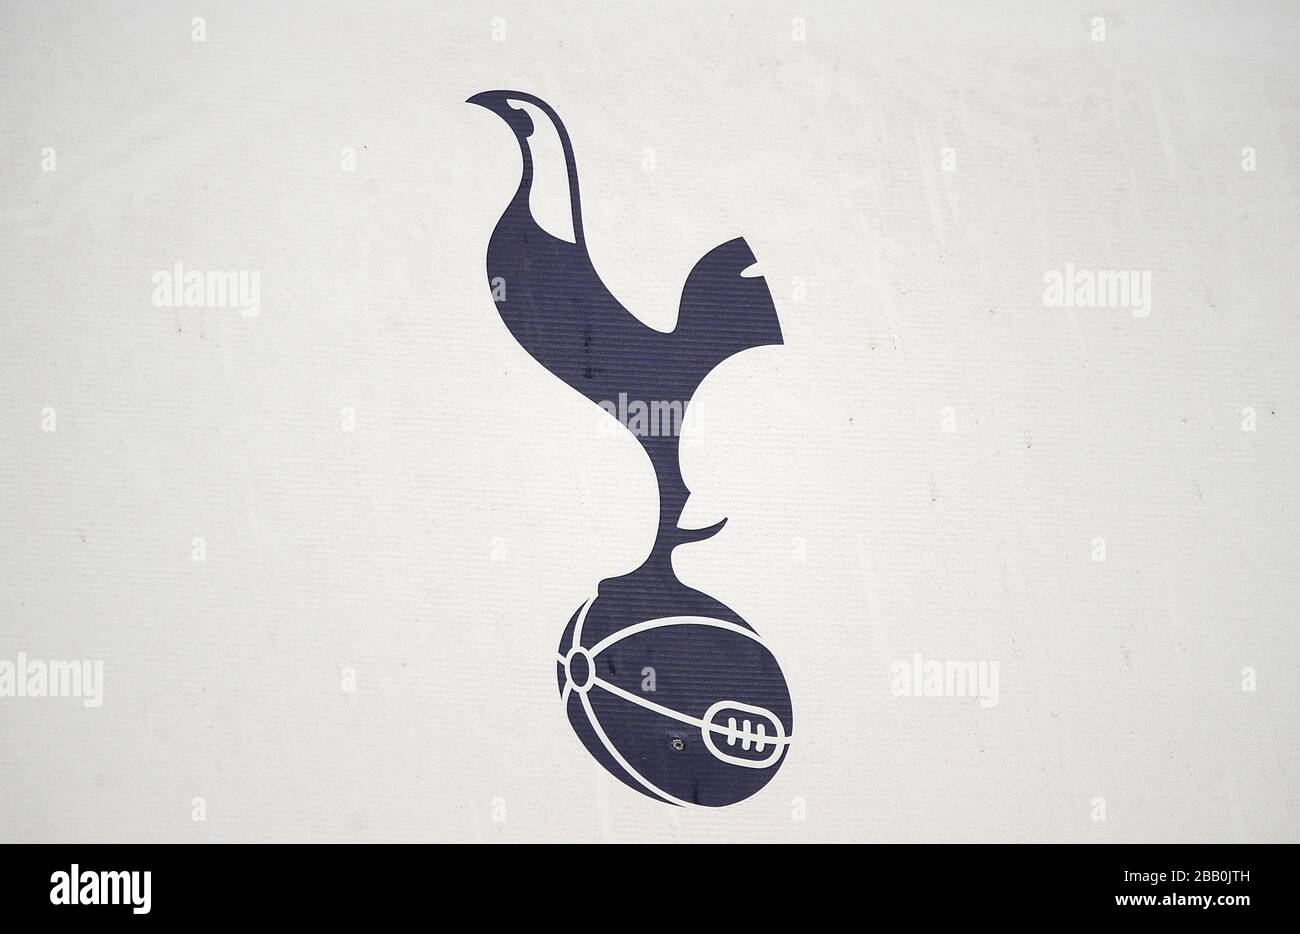 Tottenham Hotspur Logo High Resolution Stock Photography And Images Alamy